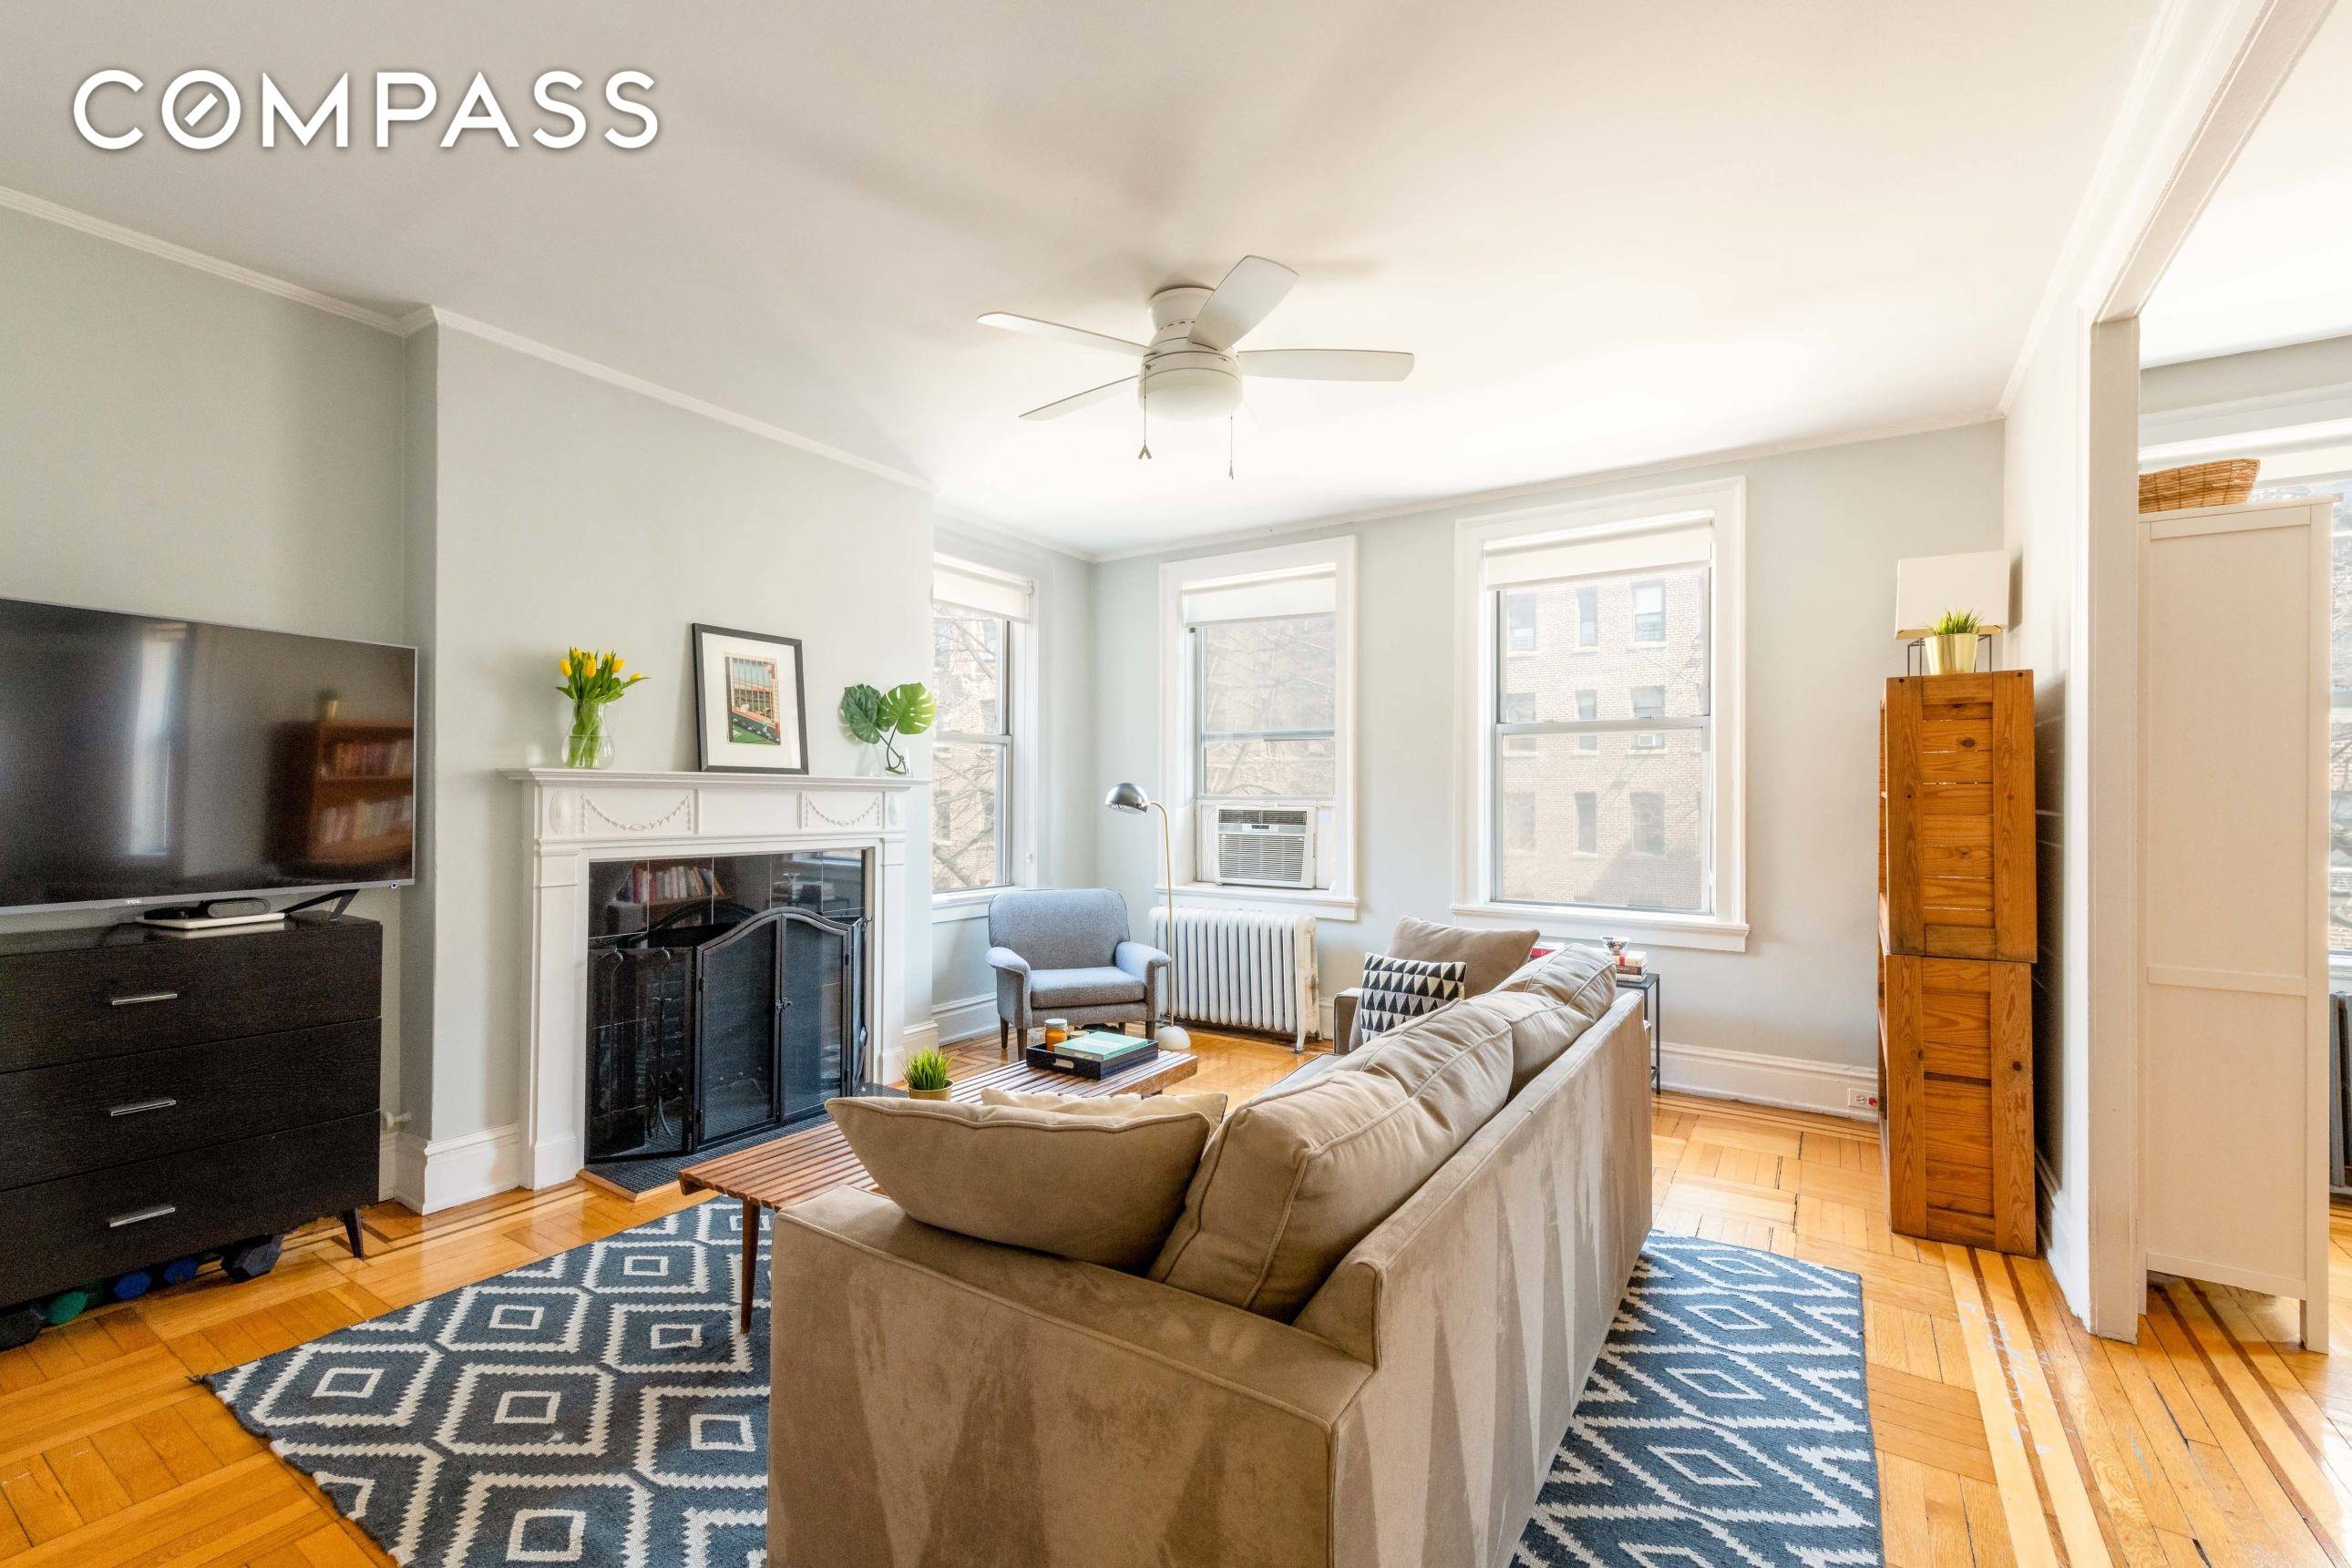 A welcoming light filled Jackson Heights co op offers a spacious two bedroom and one bath unit with a wood burning fireplace and formal dining room.